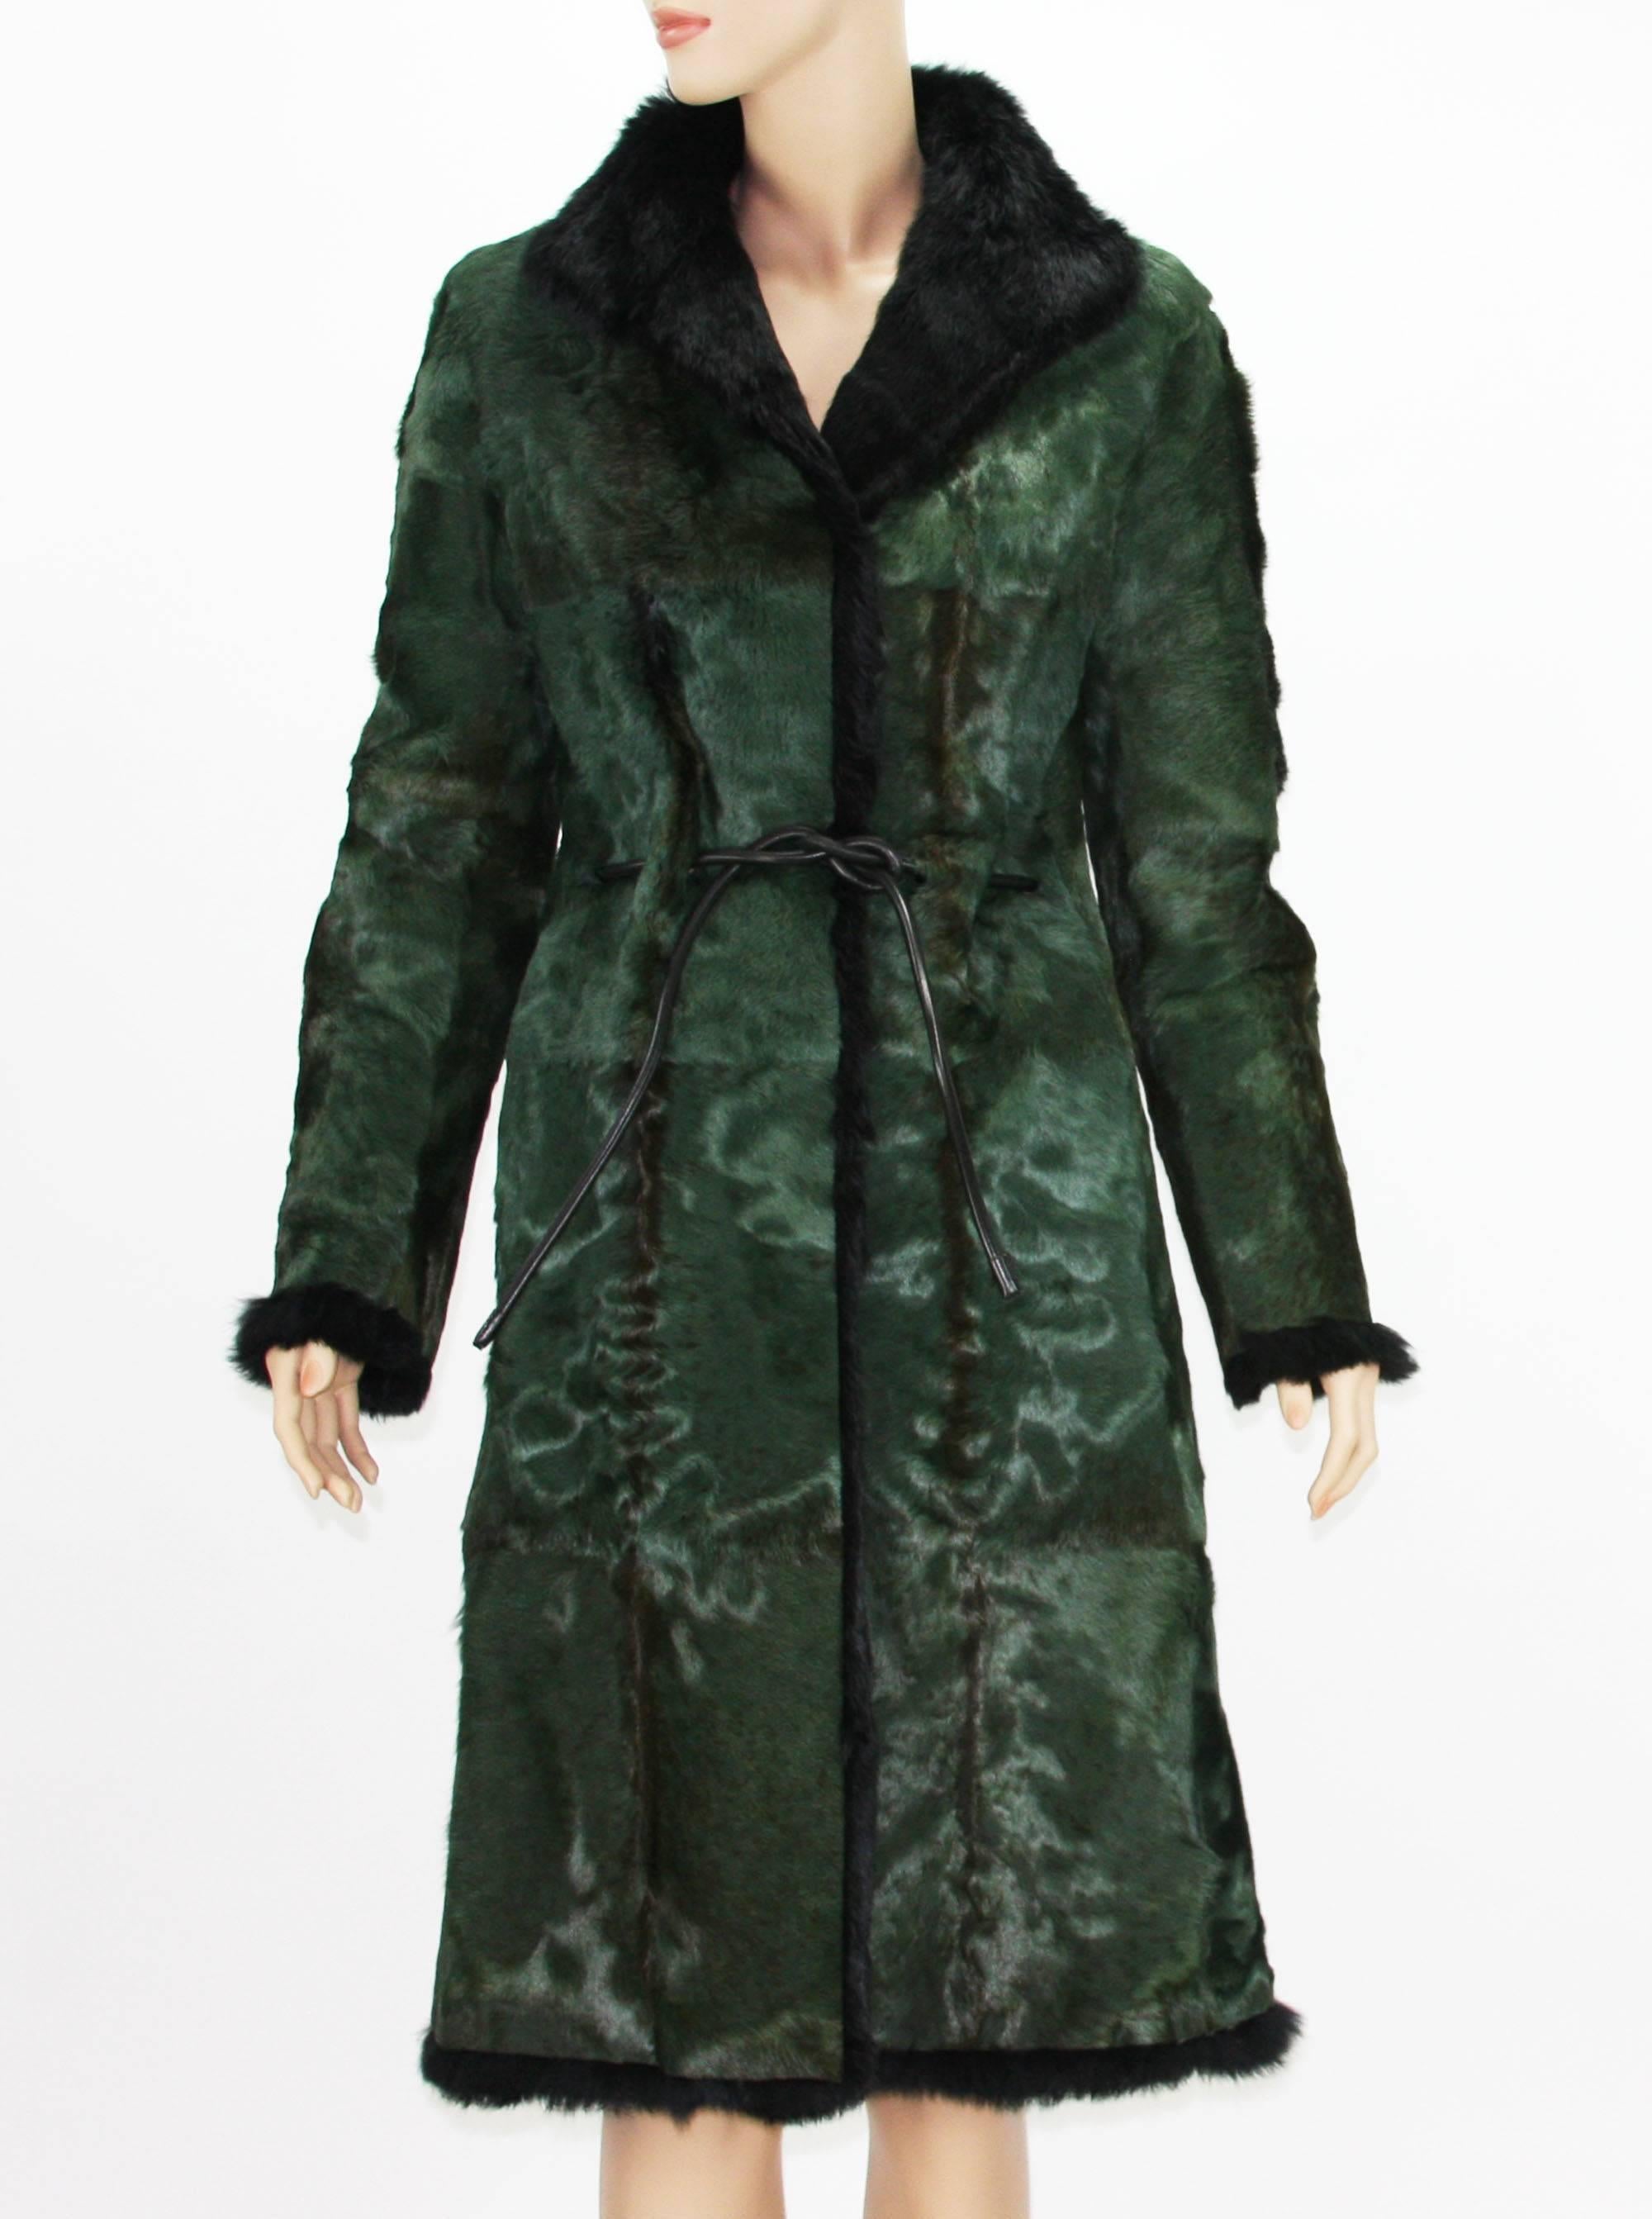 Tom Ford for Gucci 1999 Collection Reversible Emerald Green Fur Coat It. 40 In Excellent Condition For Sale In Montgomery, TX